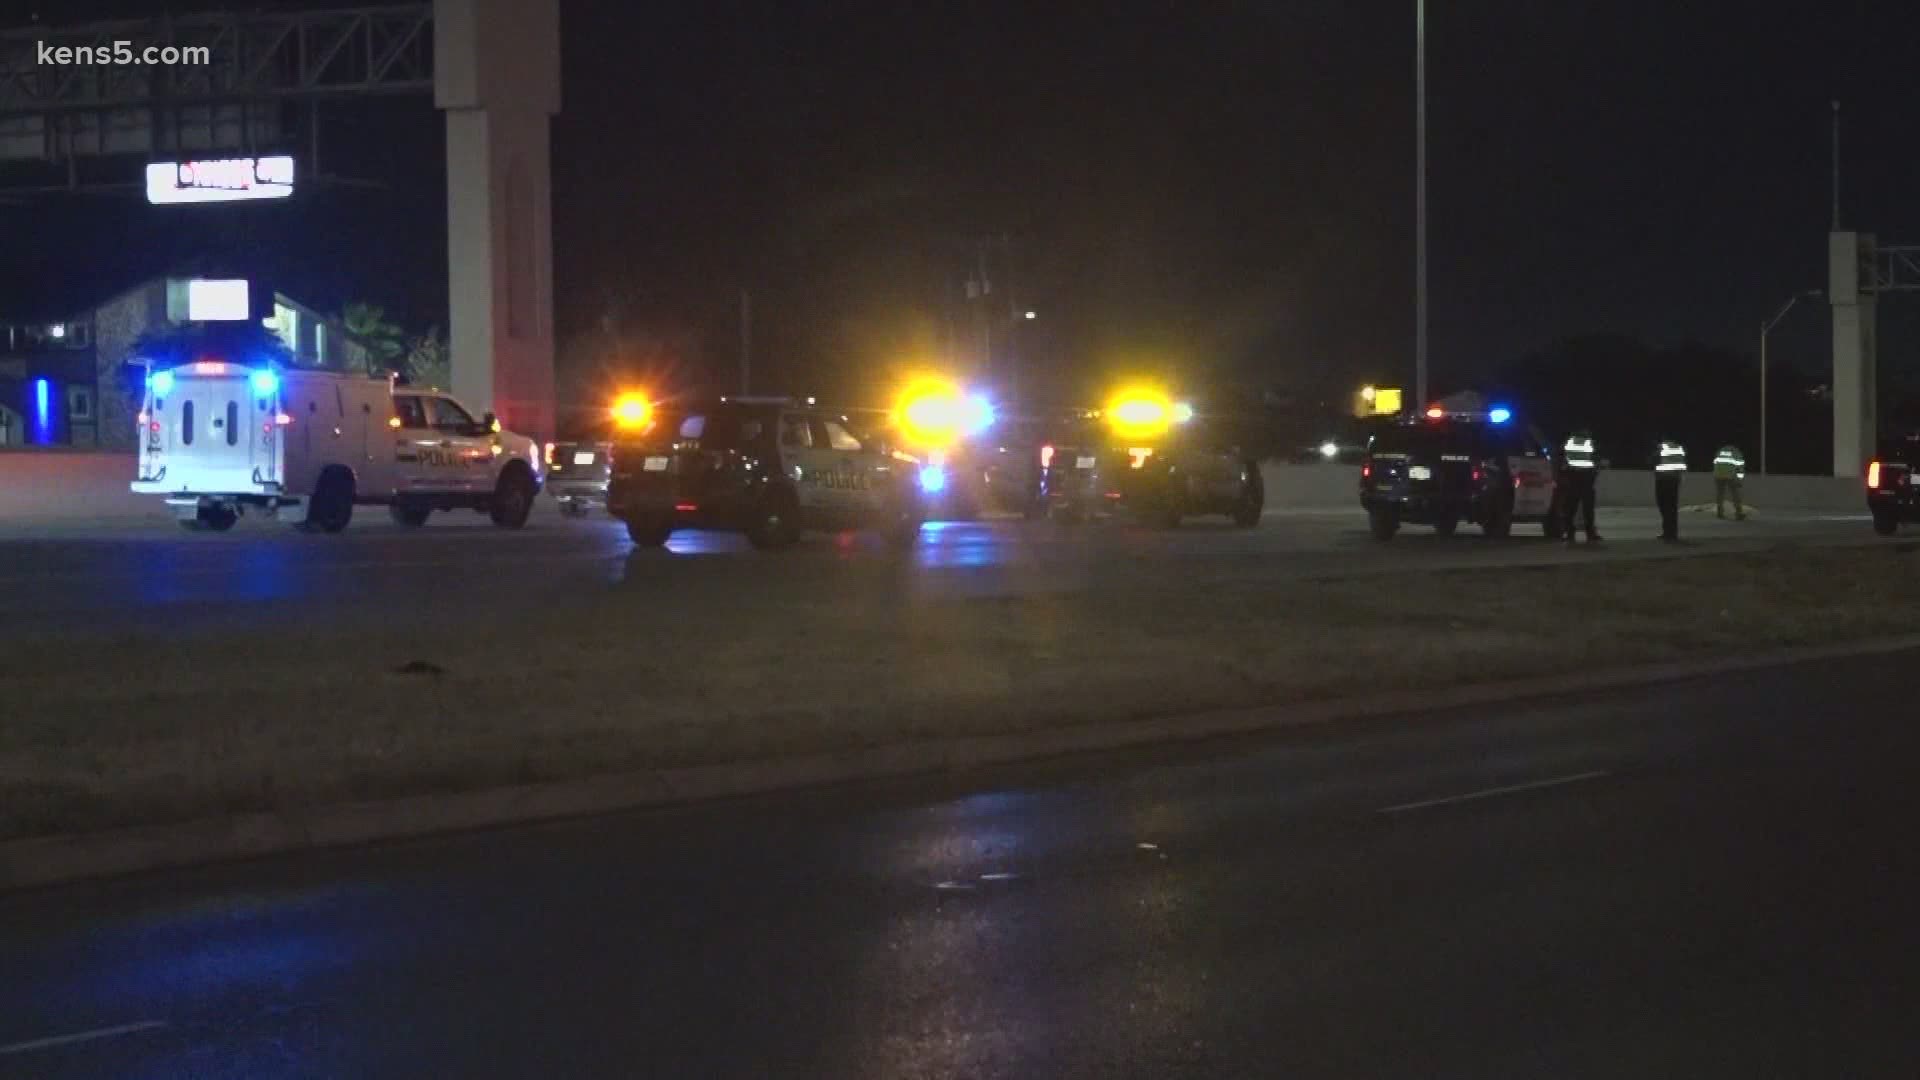 A man running across the freeway was hit by a vehicle on the city's northwest side, the San Antonio Police Department said.